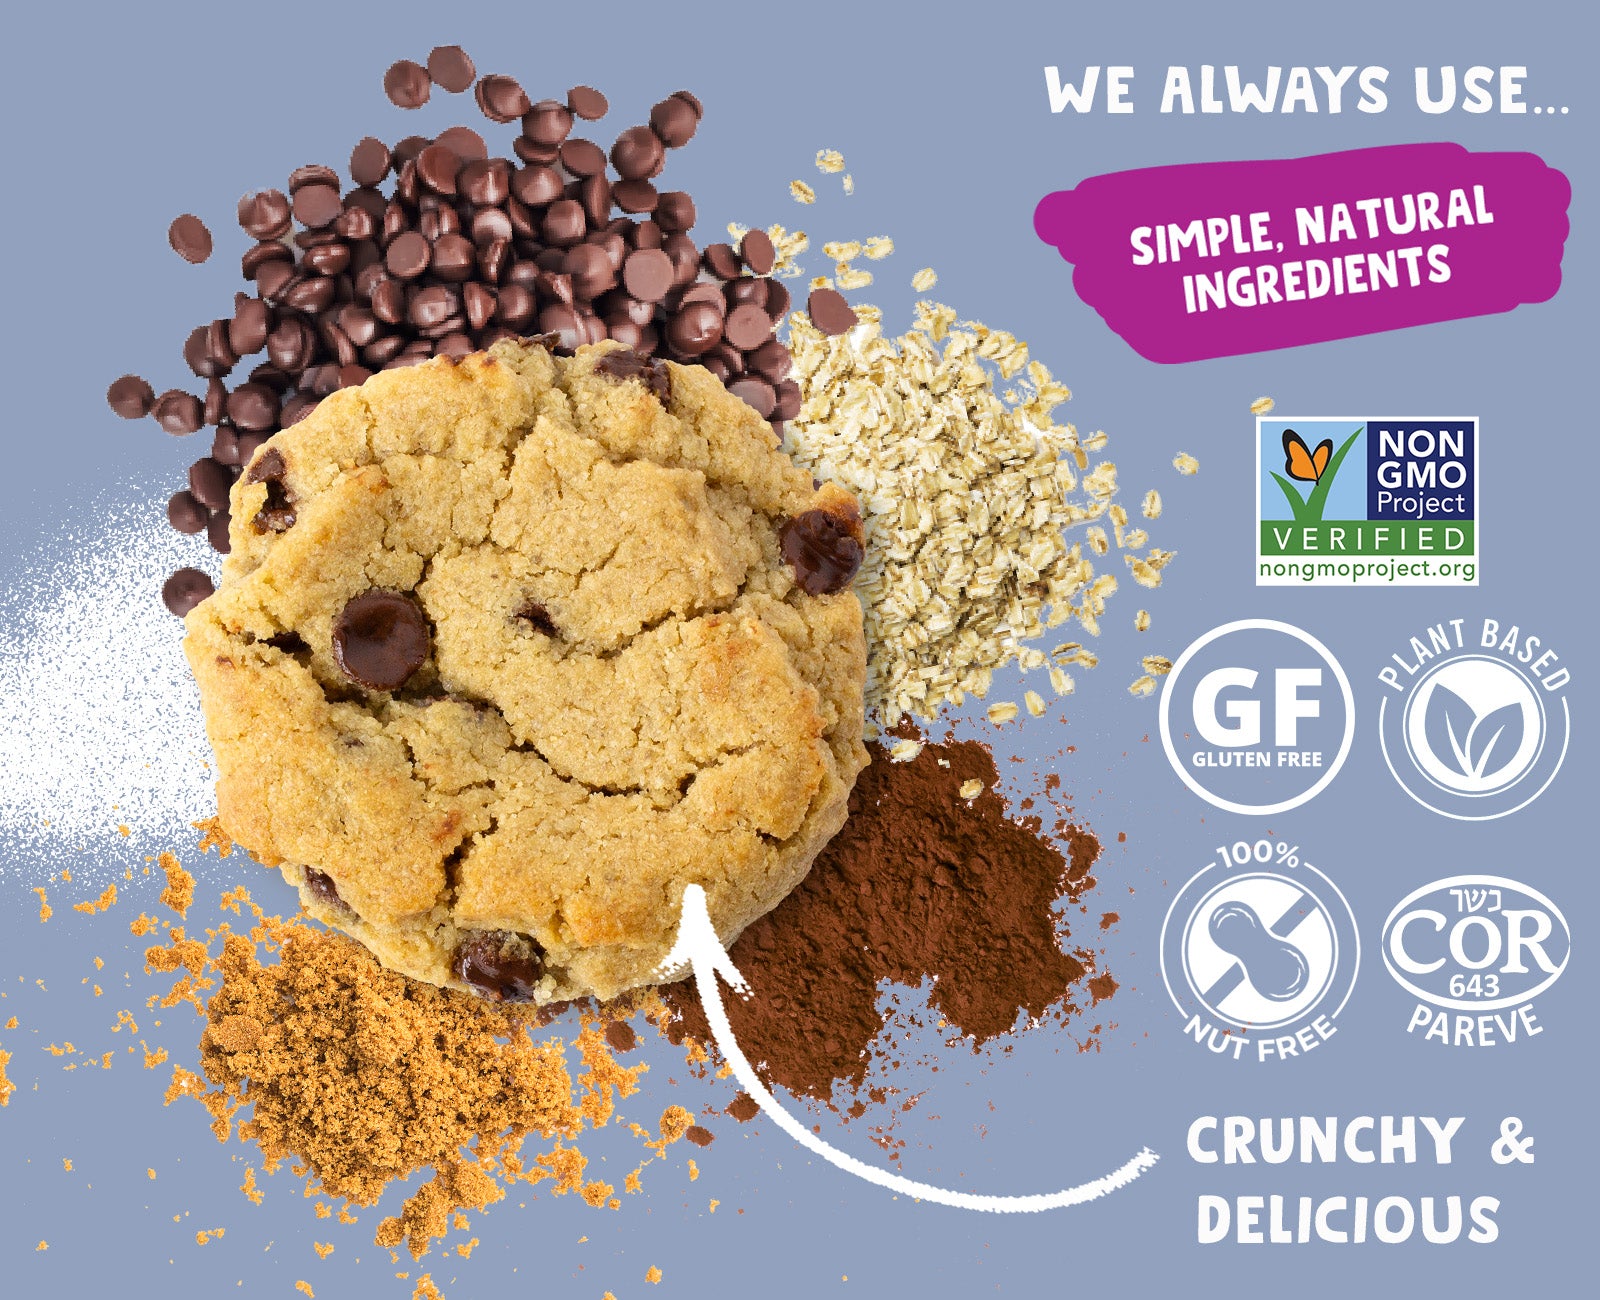 Chocolate Chip Cookies | 2 Boxes - AllergySmart - Green Gourmand Foods Inc.